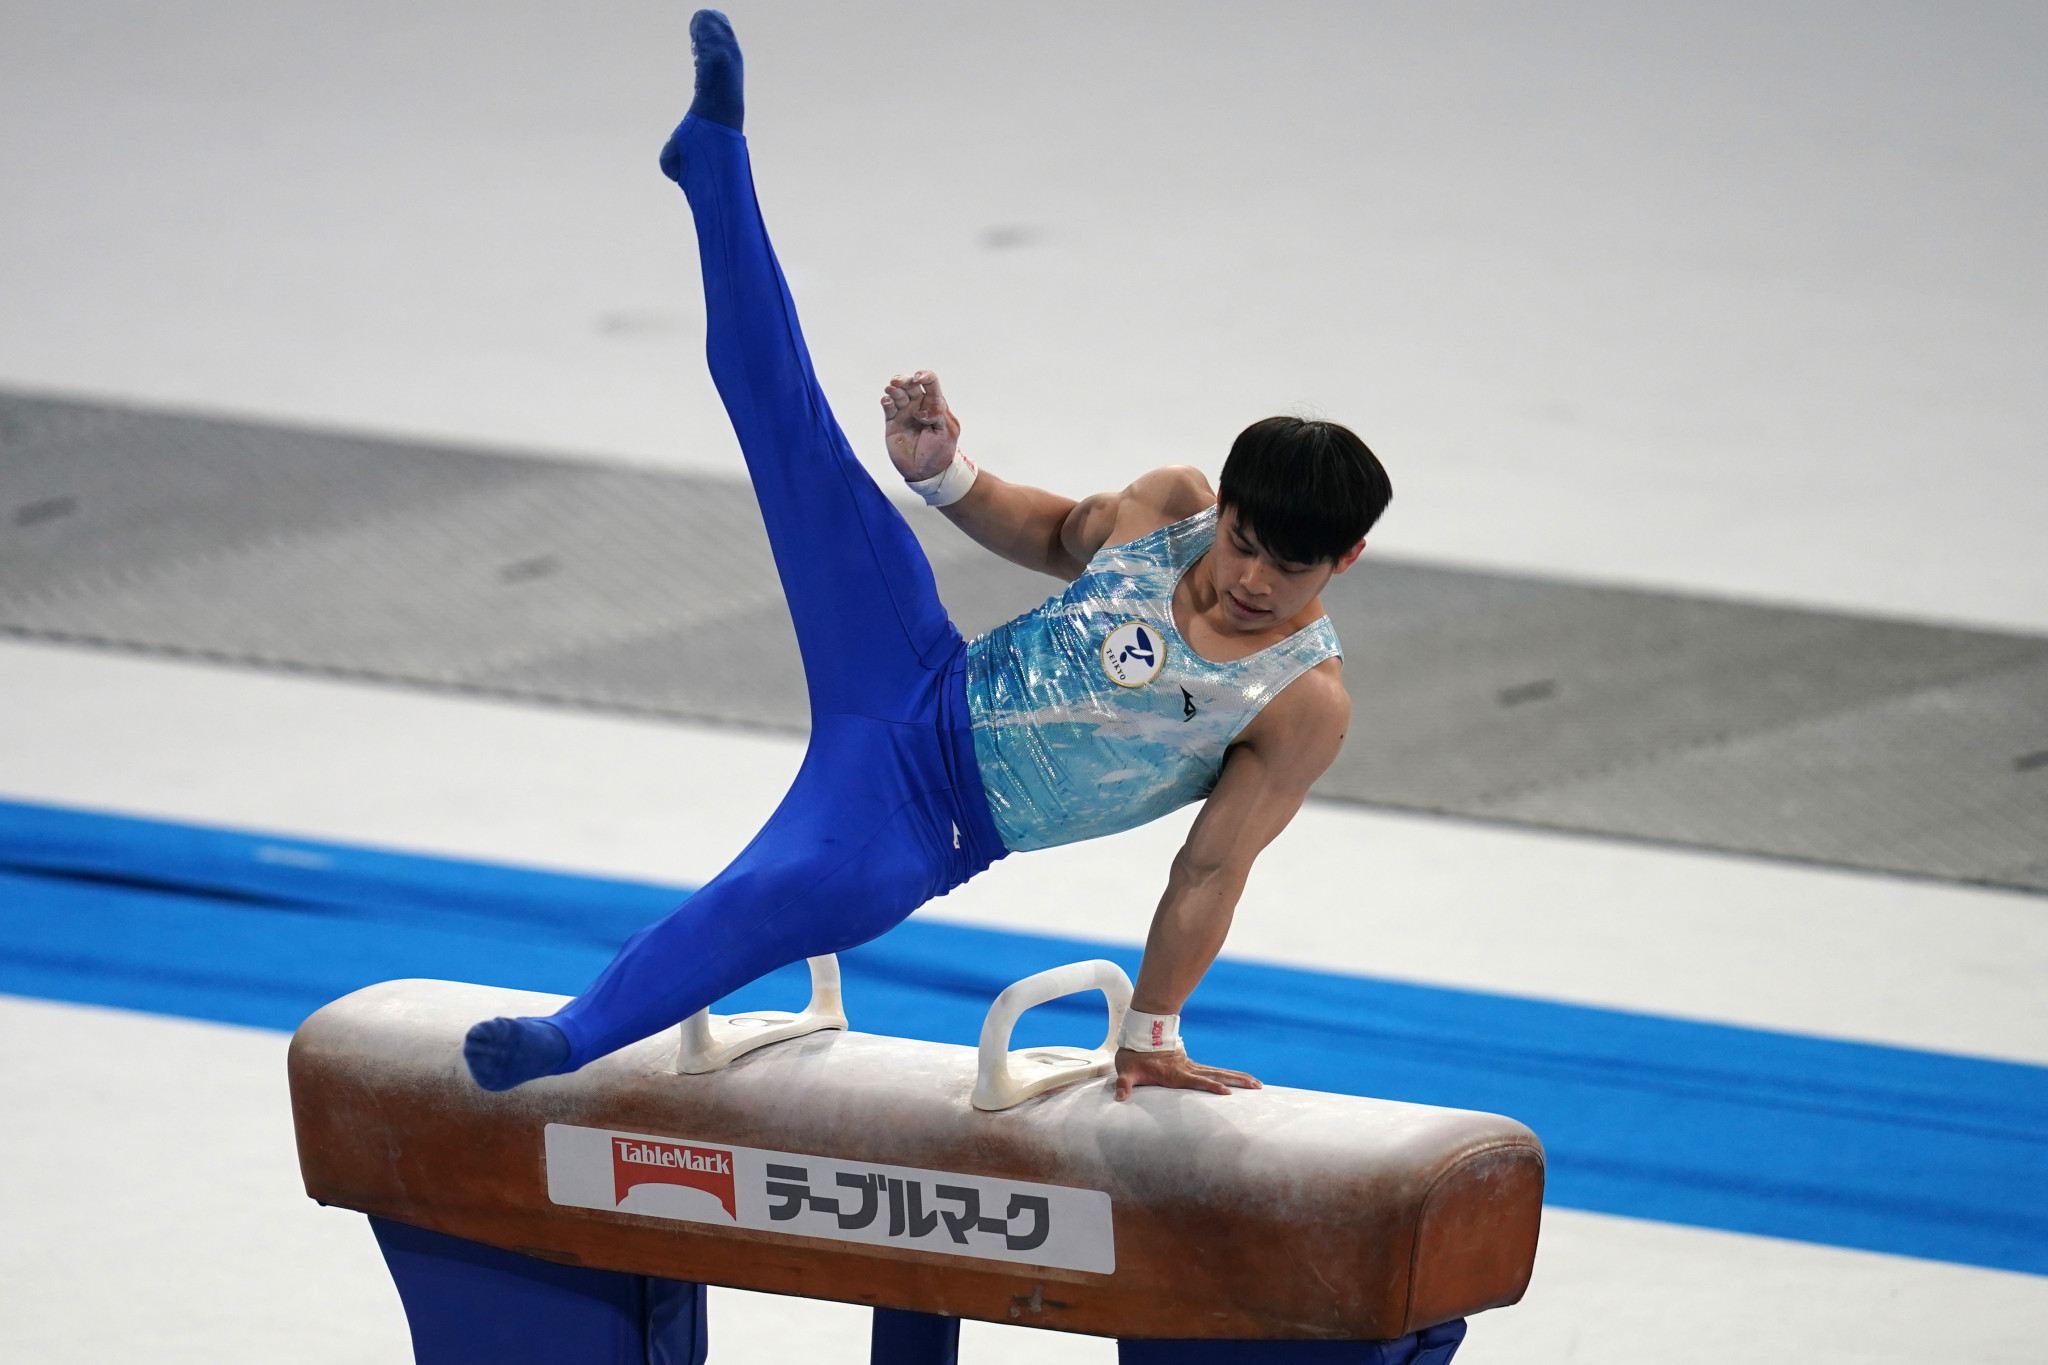 Yulo and Wei take all-around leads at Asian Artistic Gymnastics Championships